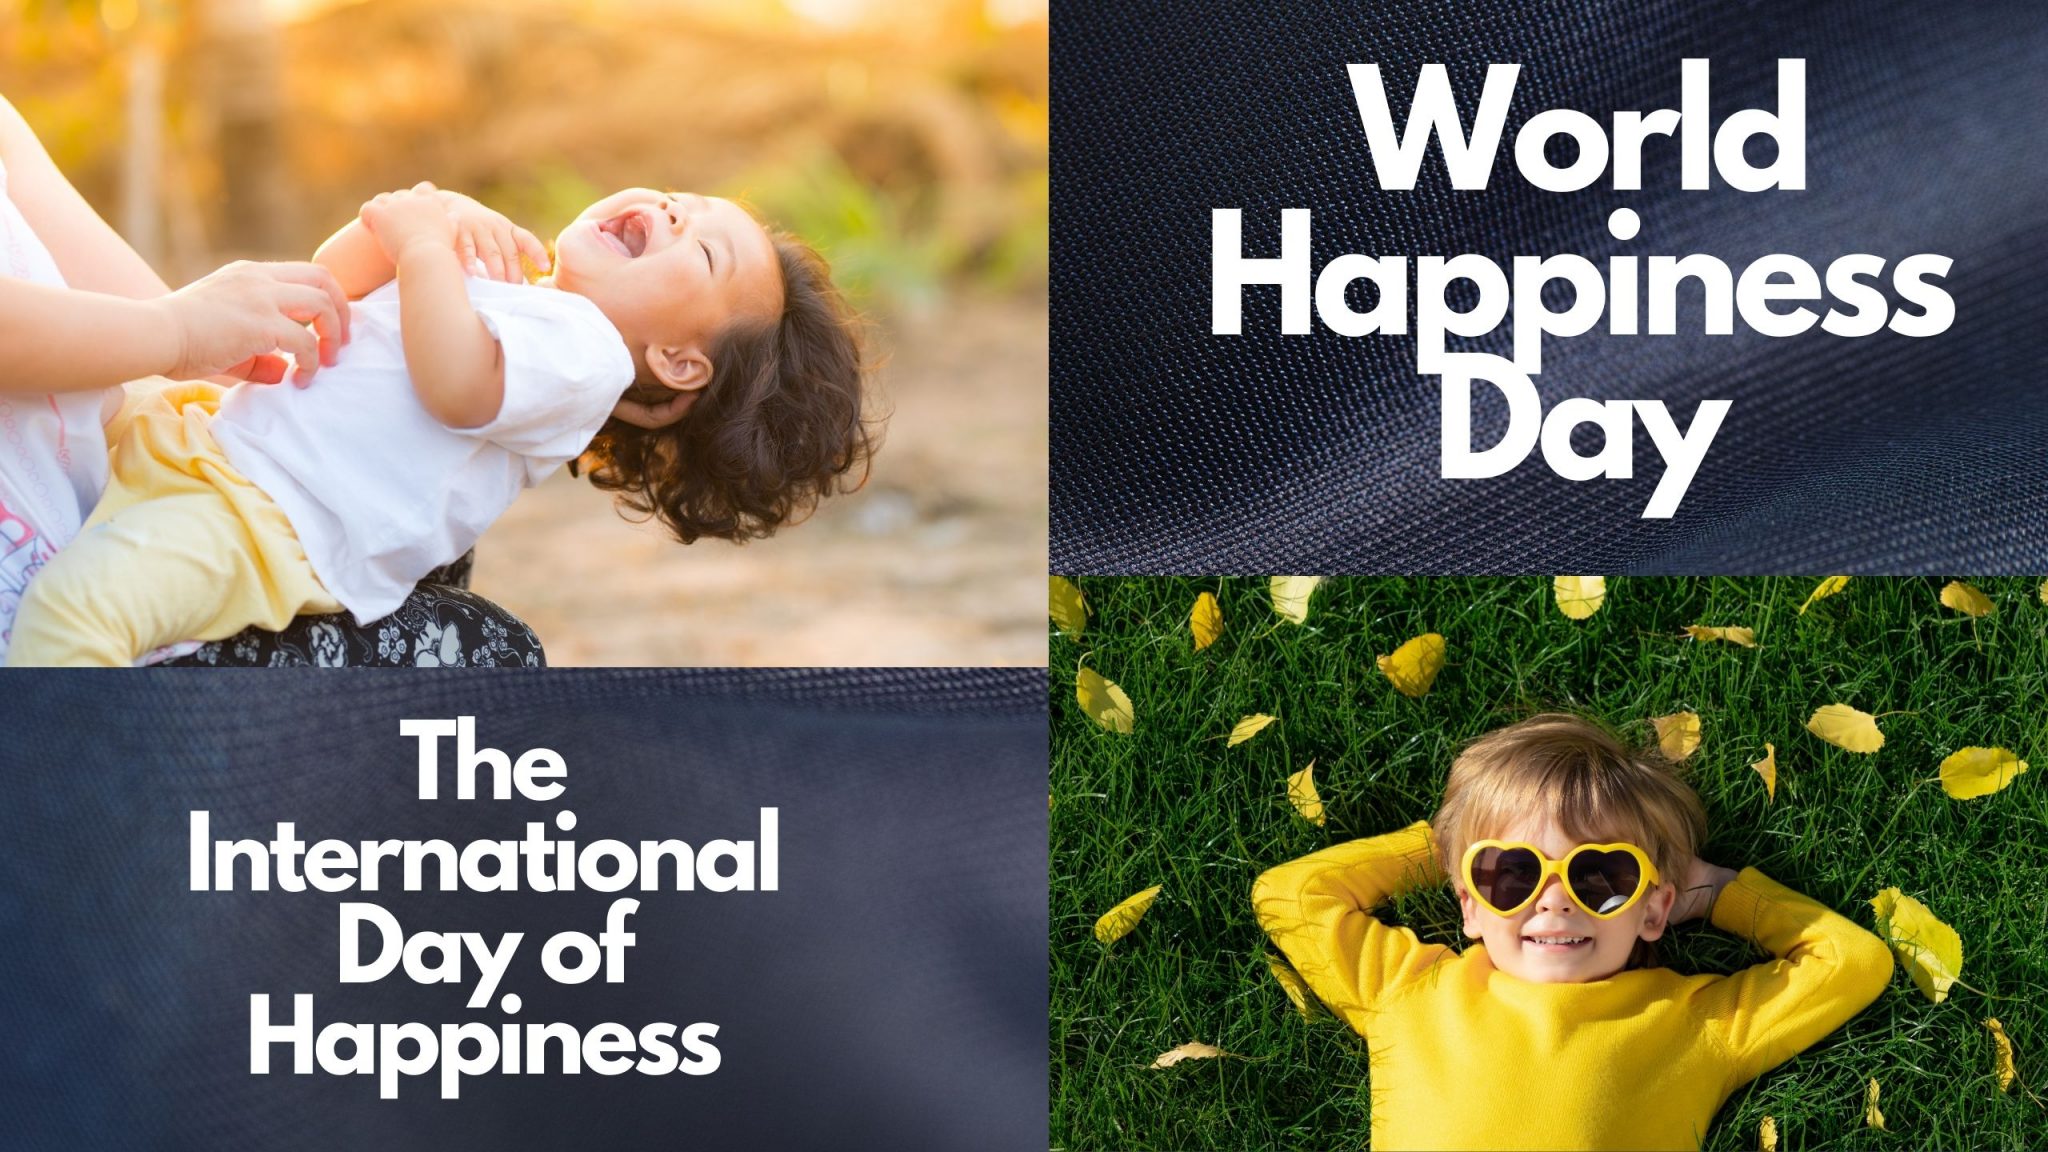 World Happiness Day The International Day of Happiness March 20